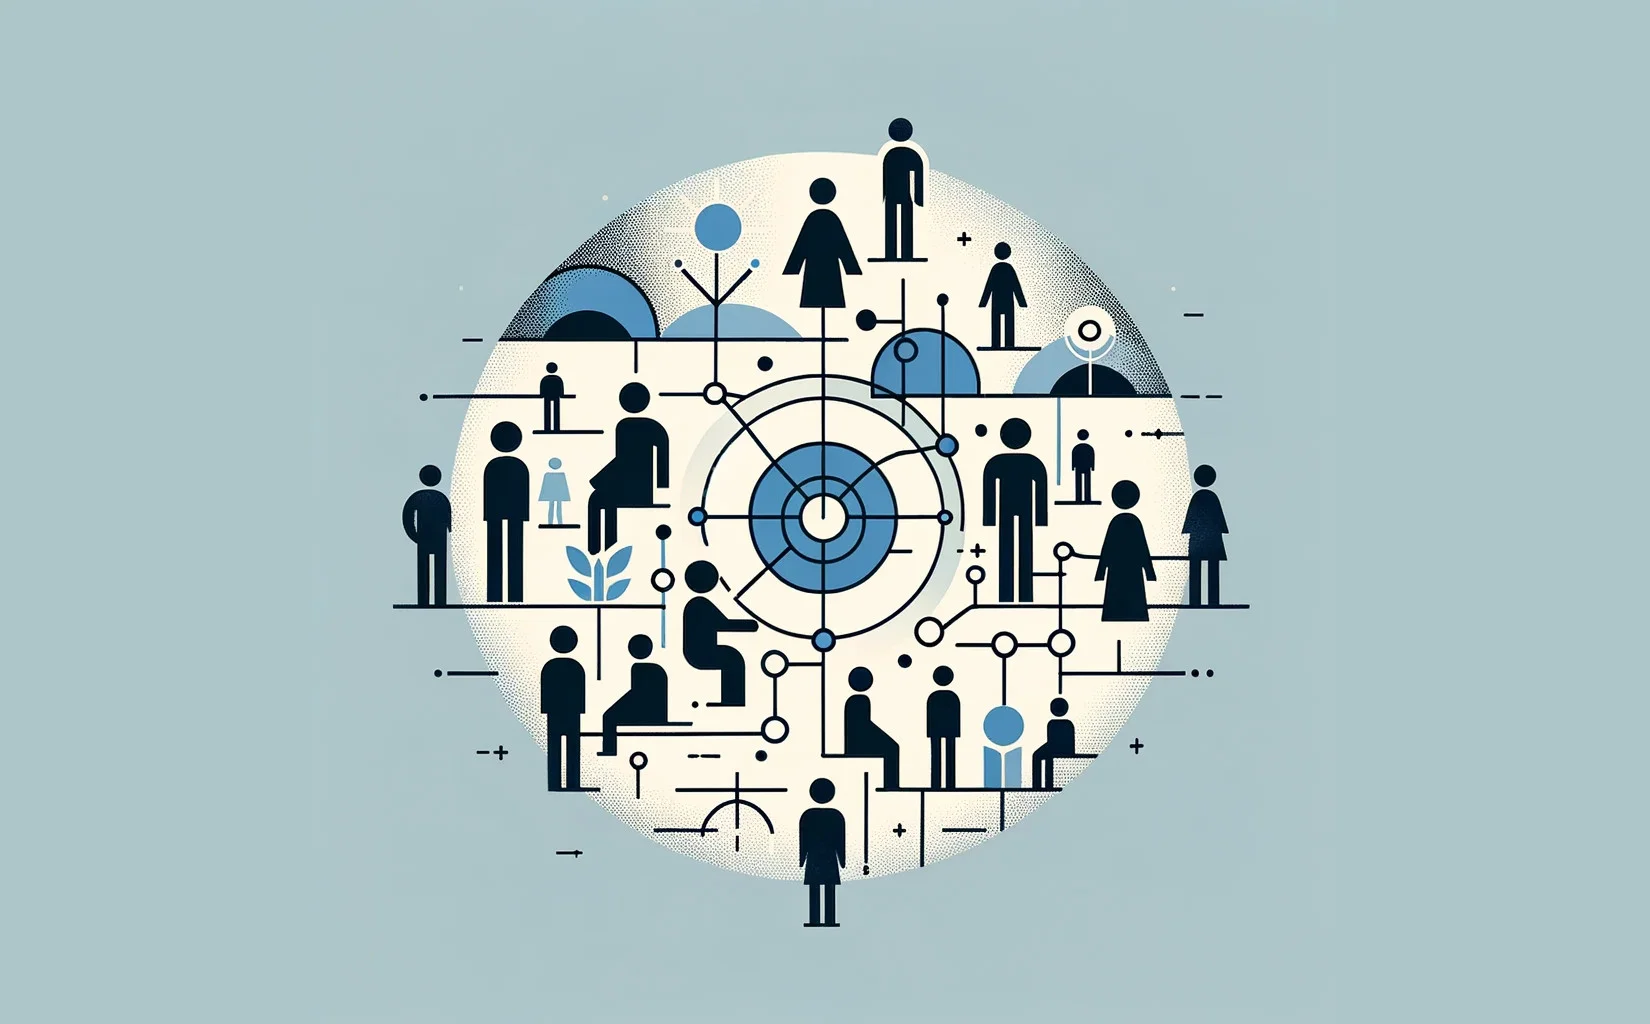 A circular illustration with groups of figures interacting socially on a light blue background.